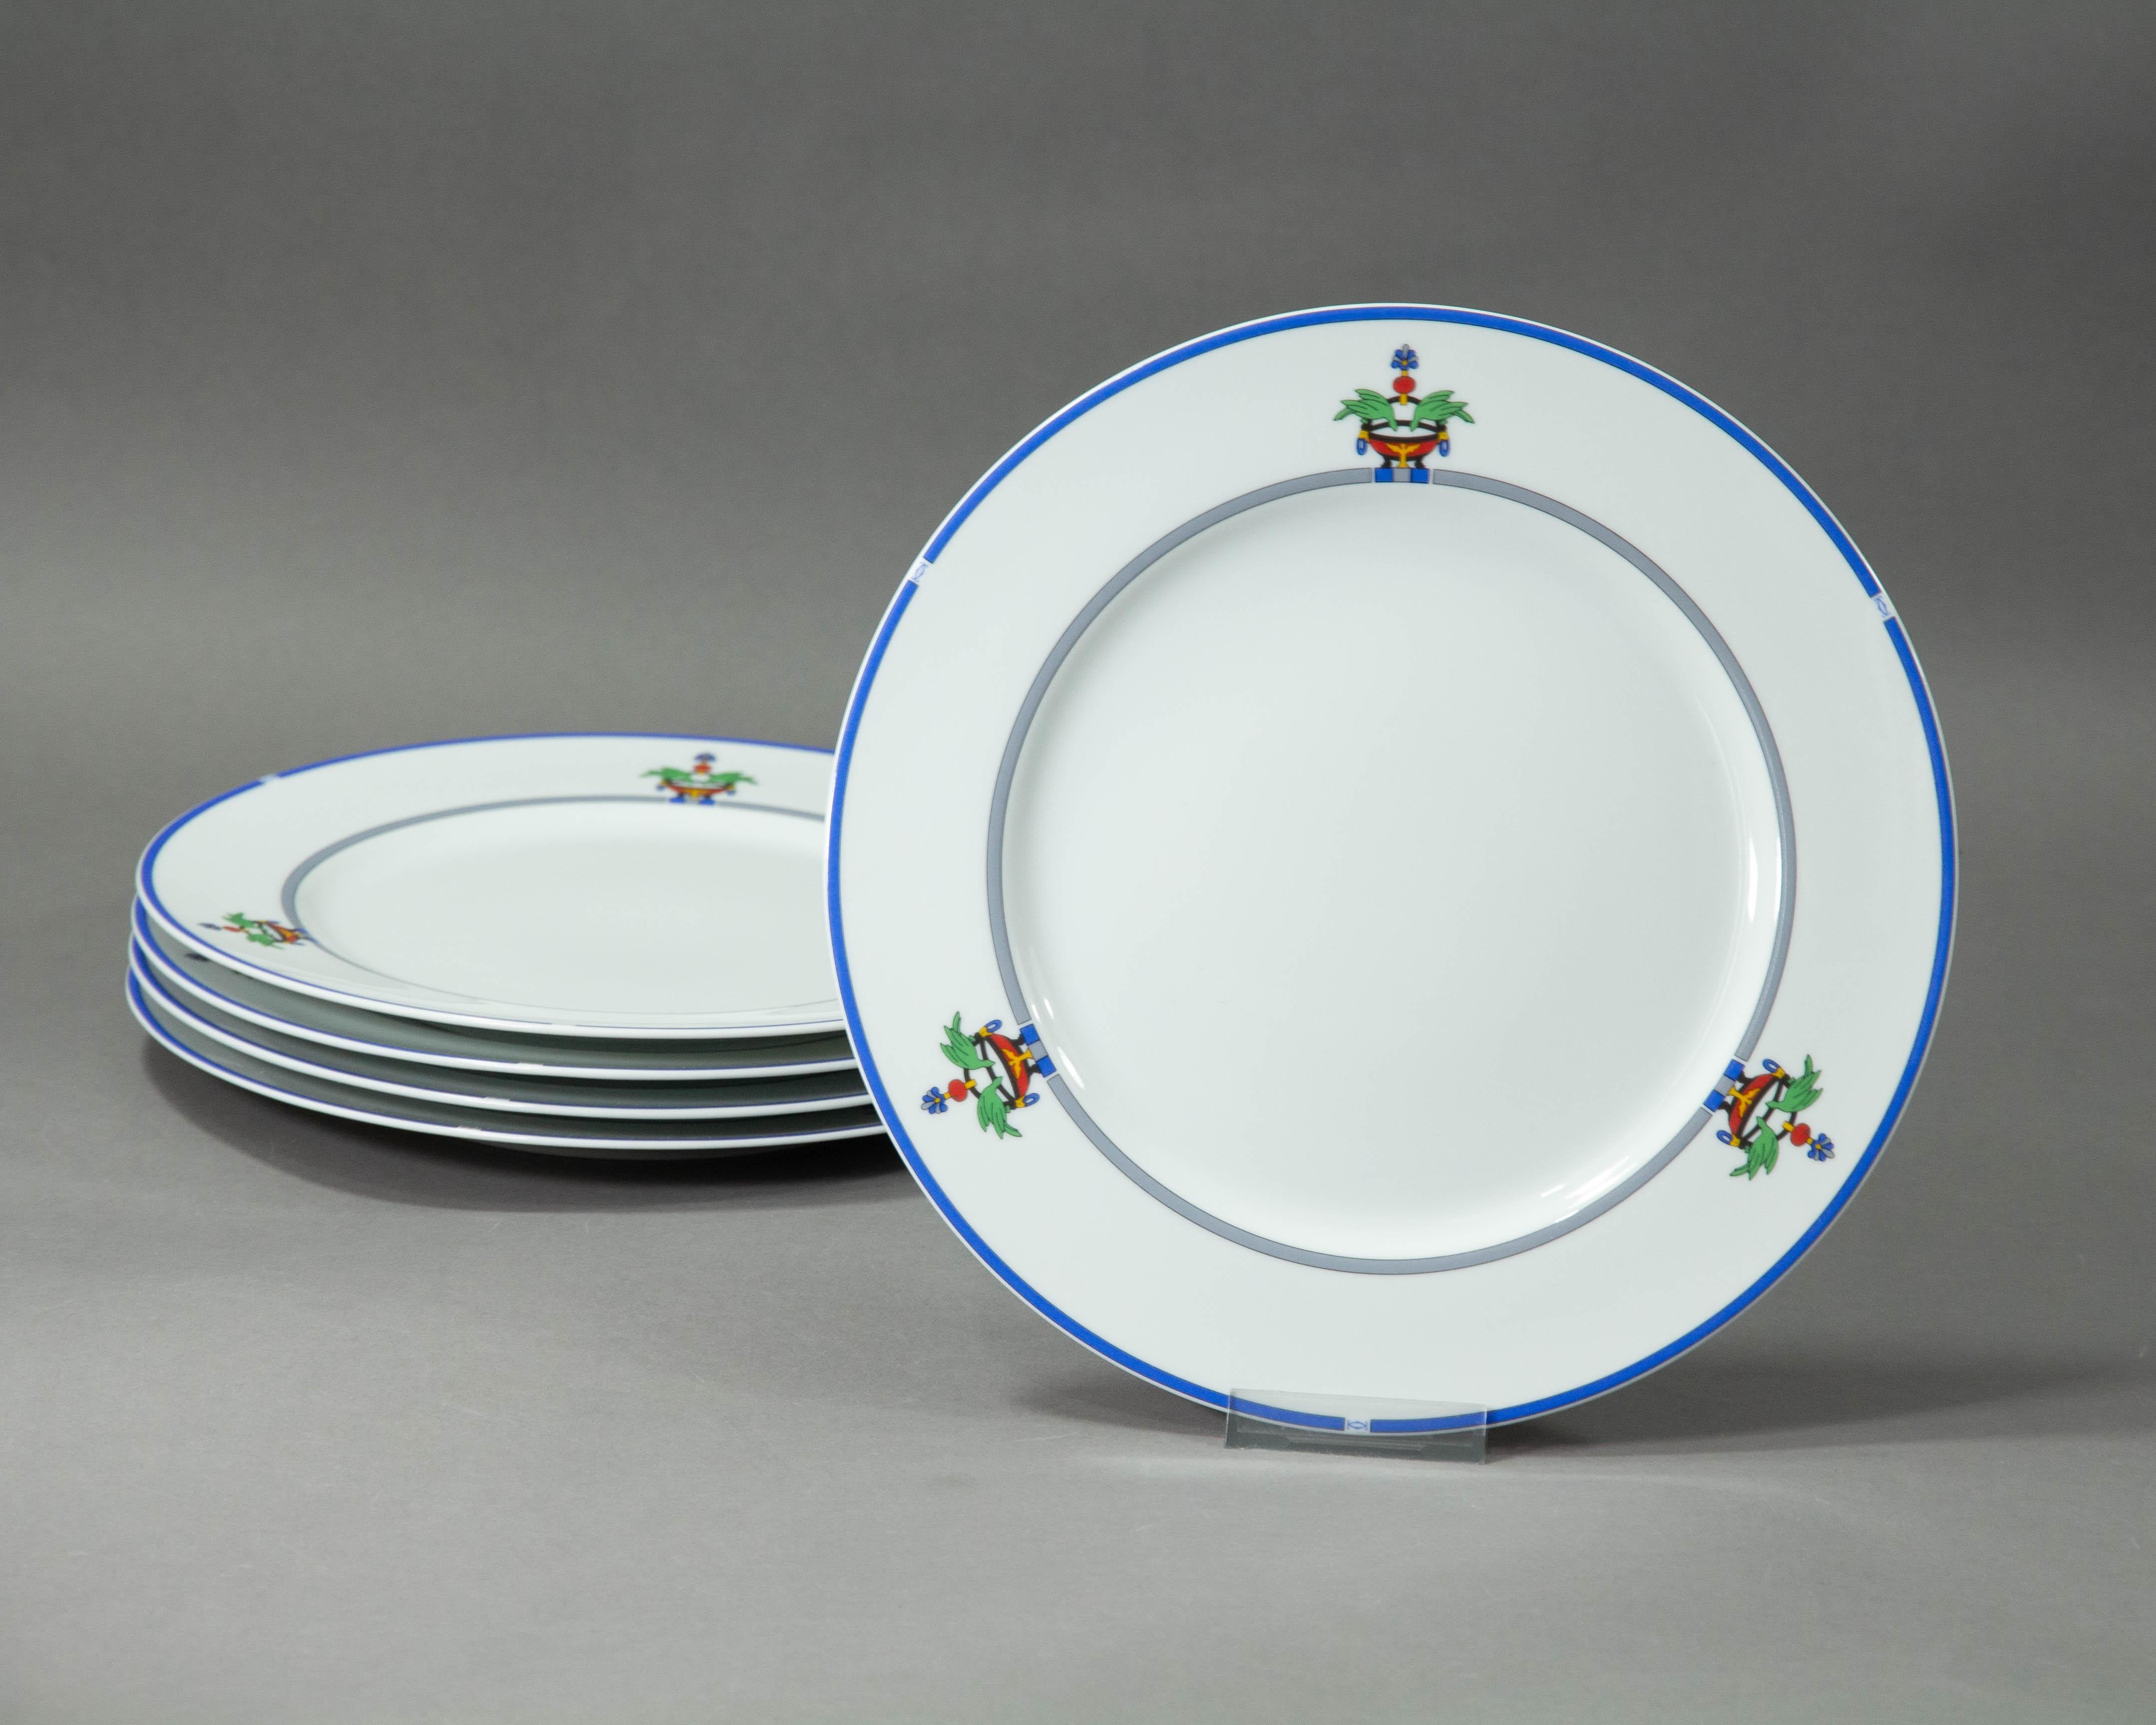 A Cartier Venetienne dinner plate.

The porcelain plate was made in Limoges for Cartier La Maison in 1989, the decoration is called 'Venetienne'.

The luxury jeweler and watchmaker Cartier made a range of high end housewares in the 1980s and